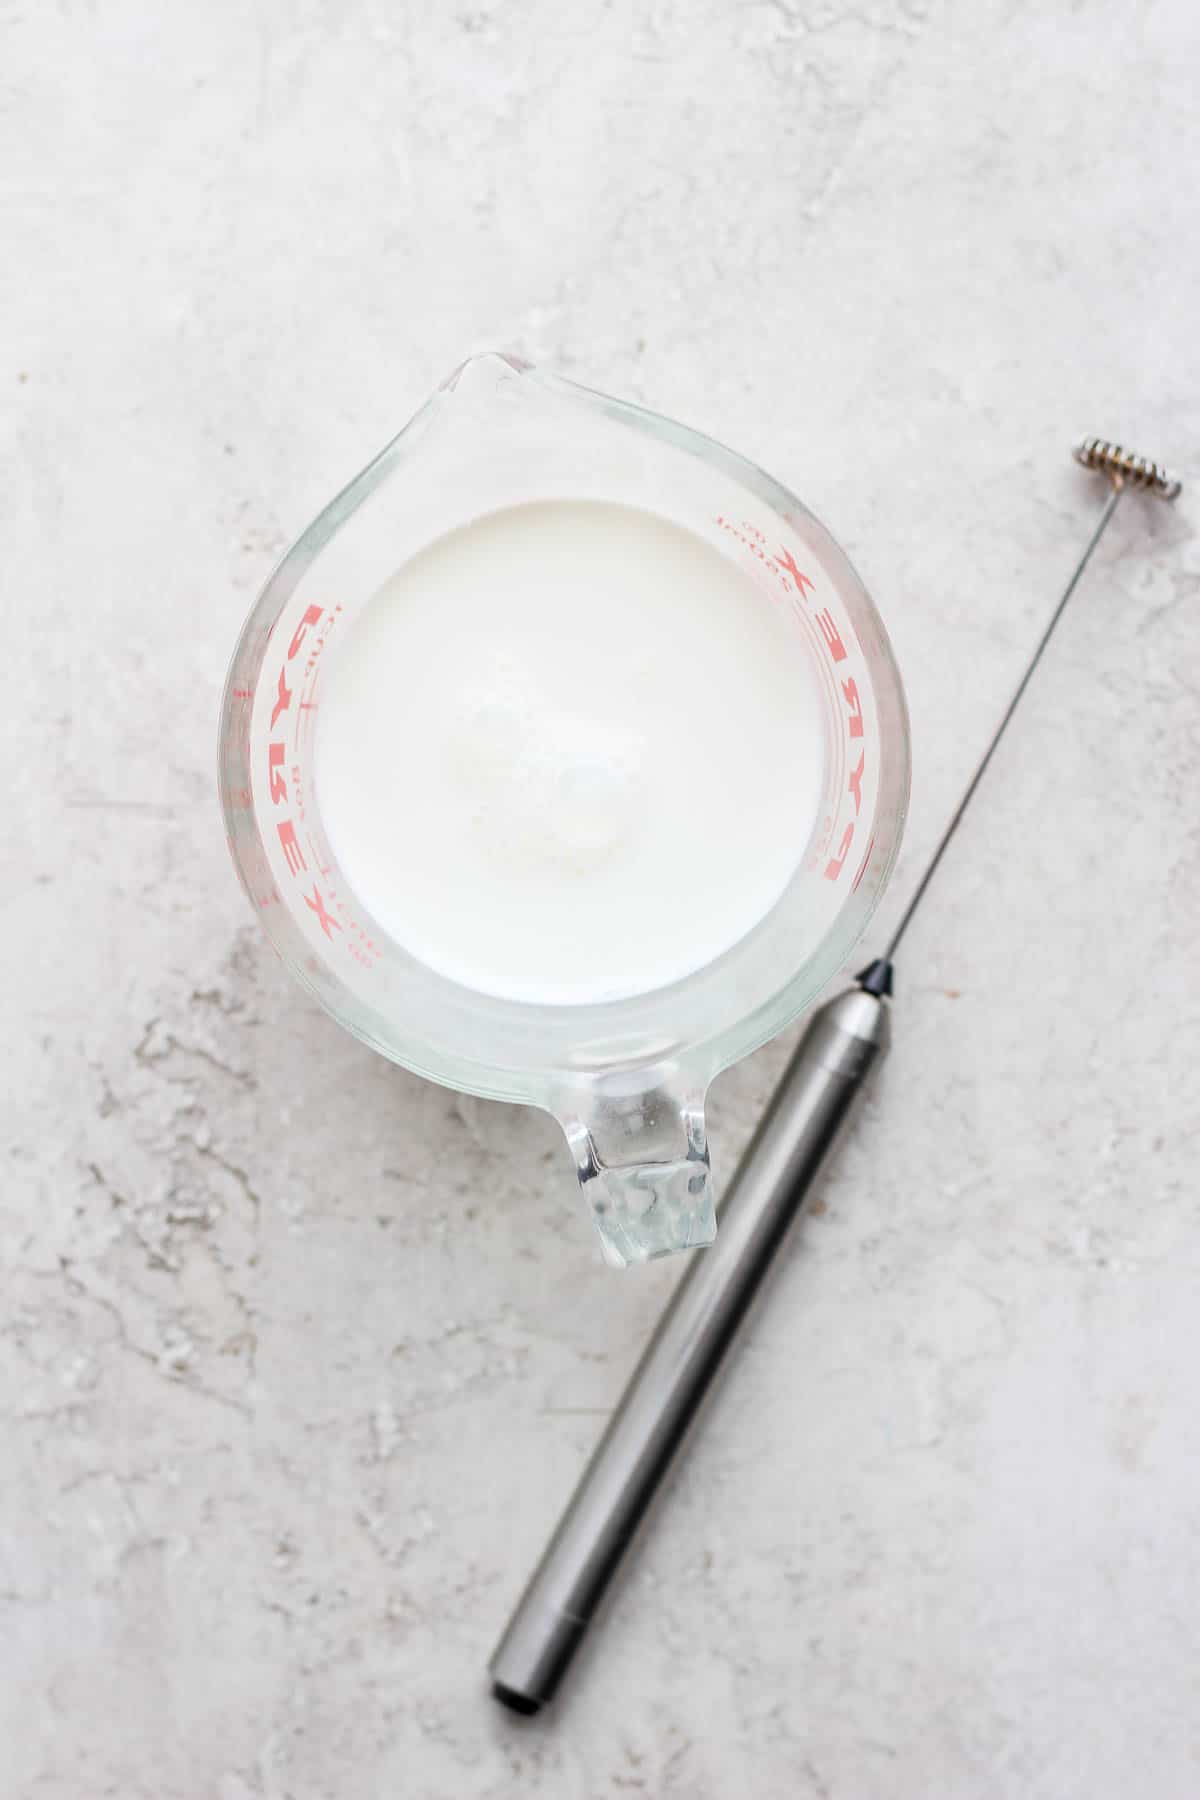 A handheld frother next to a glass measuring cup full of milk. 